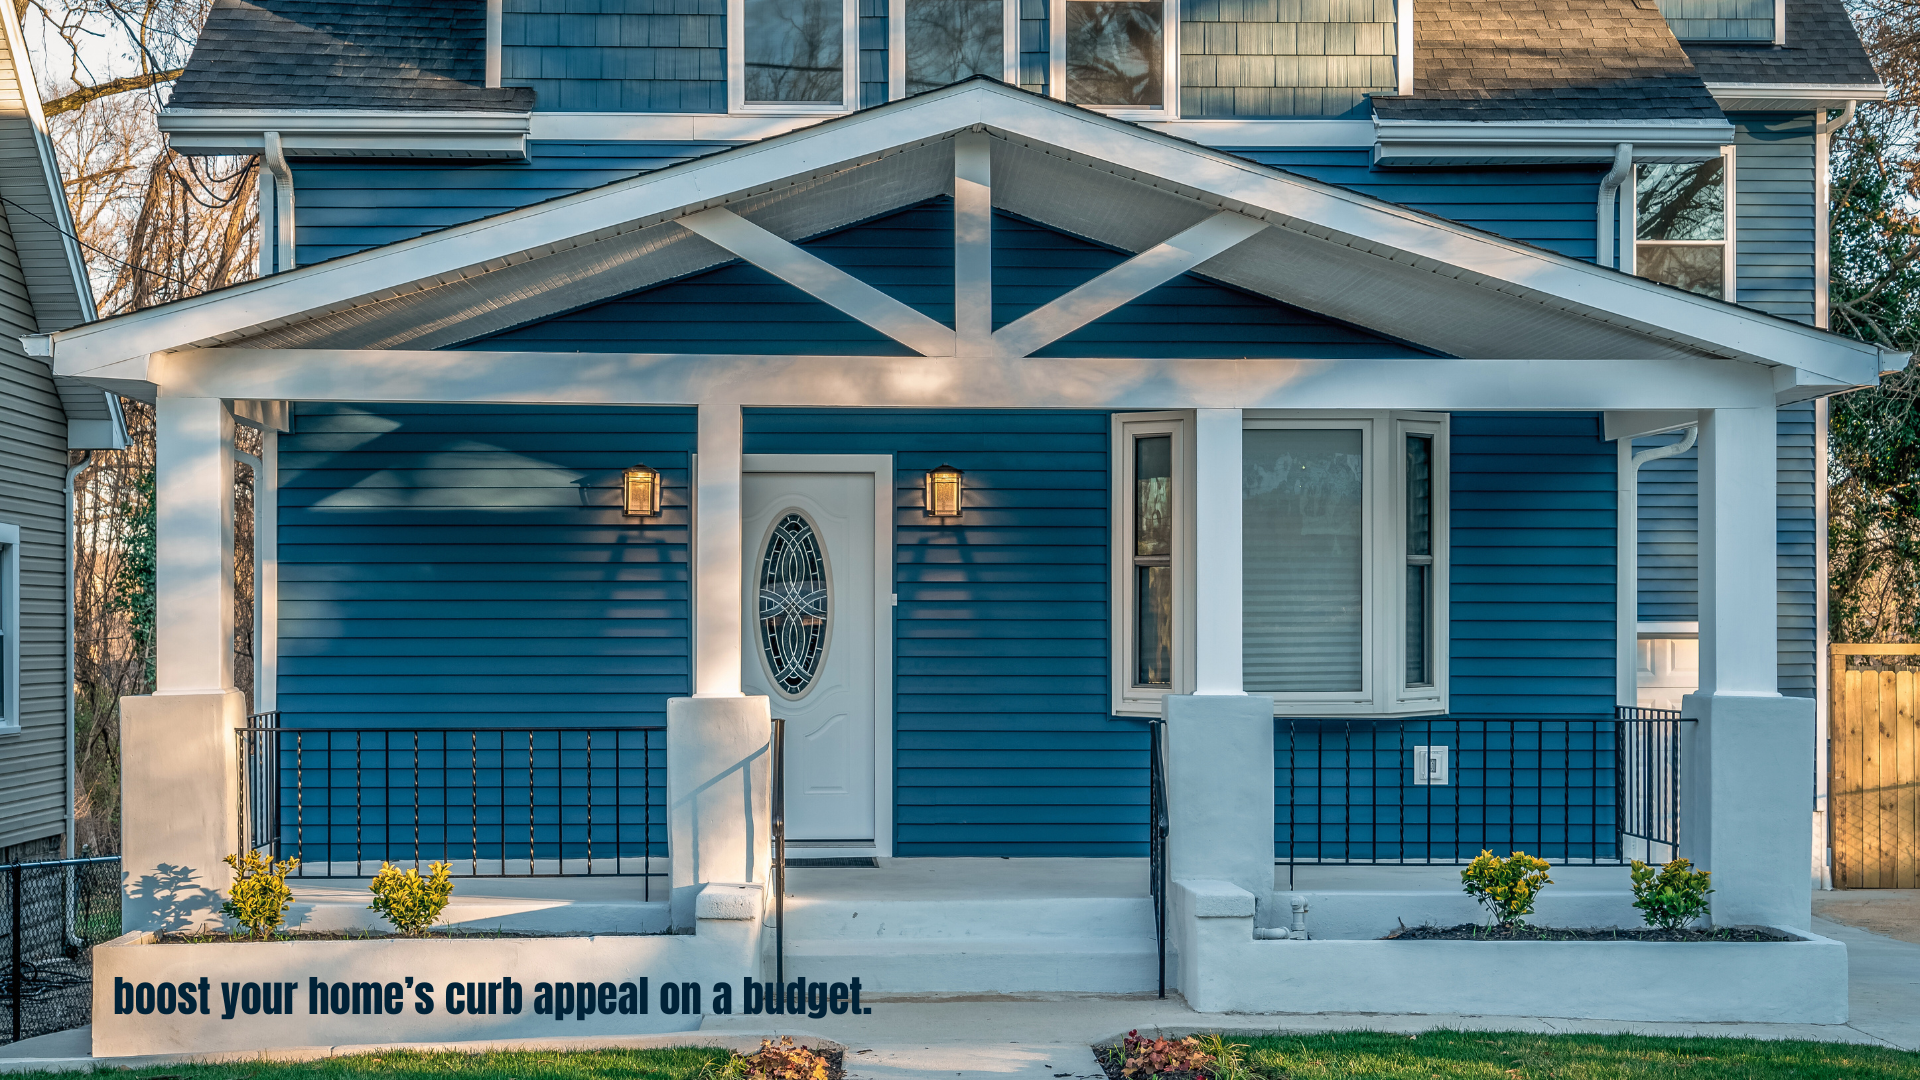 Boosting home's curb appeal on a budget